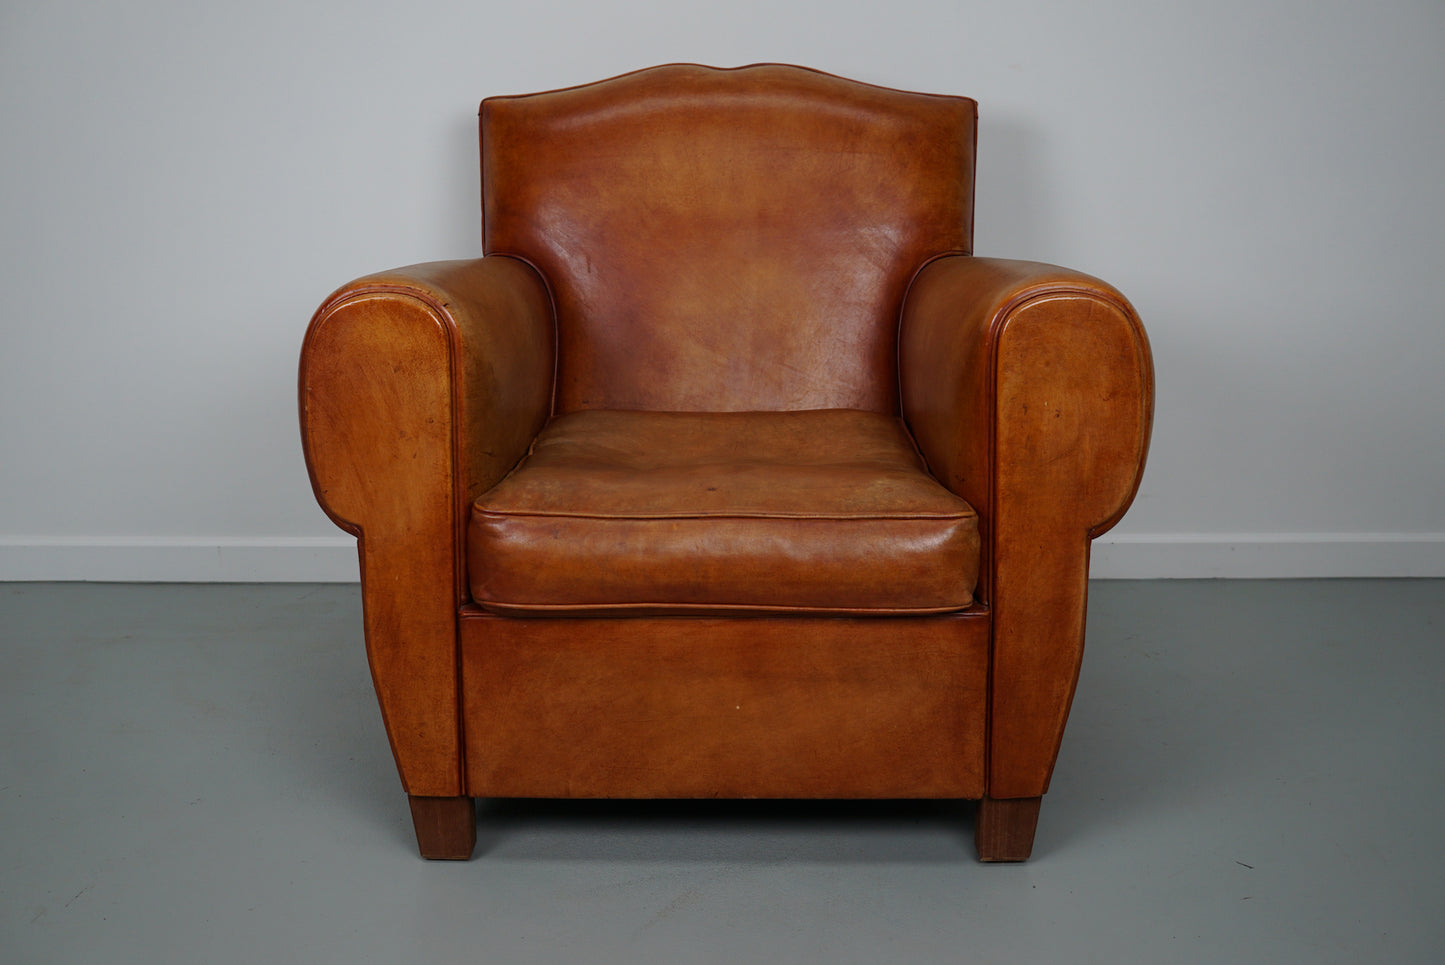 Vintage French Moustache Back Cognac-Colored Leather Club Chair